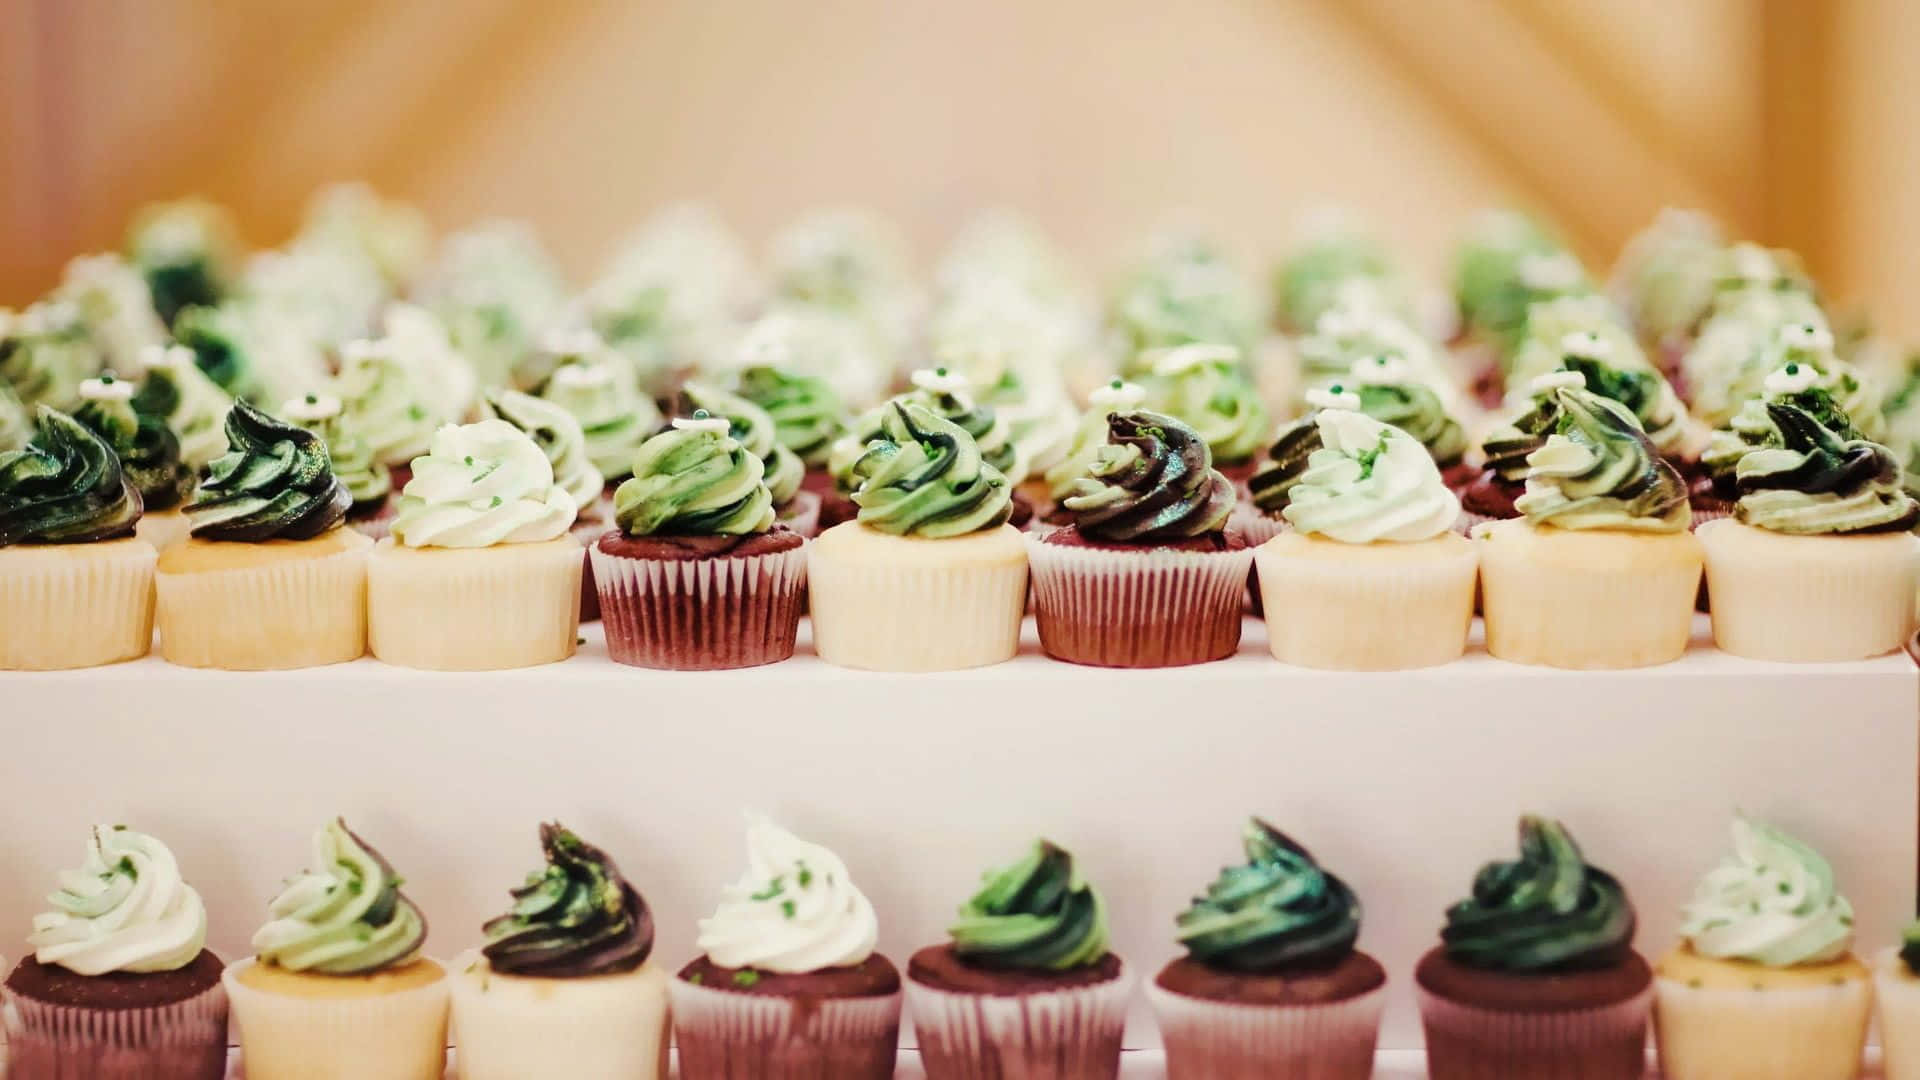 Cupcakes With Green And White Frosting On A White Stand